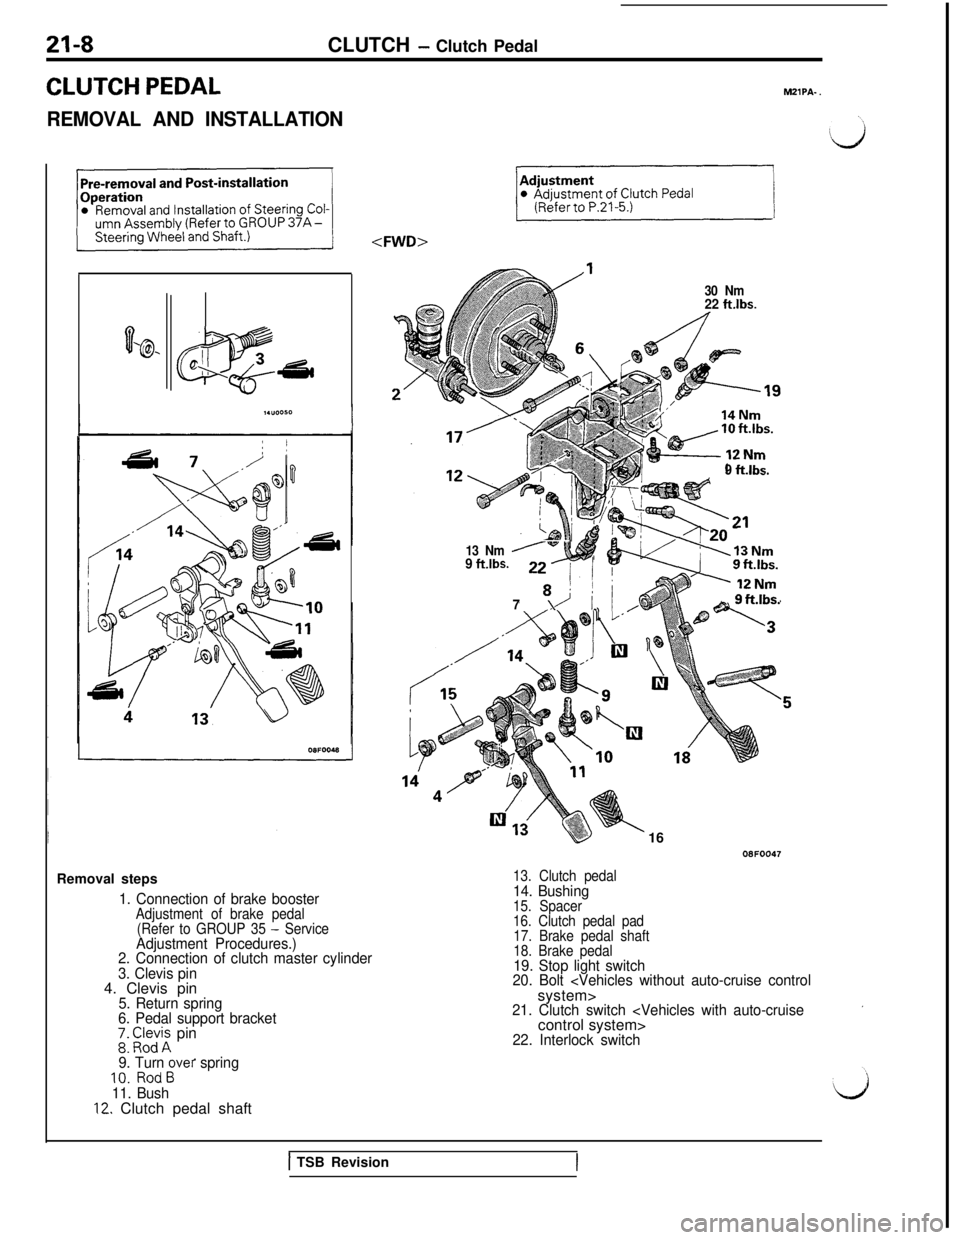 MITSUBISHI 3000GT 1991  Service Manual 21-8CLUTCH - Clutch Pedal
CLUTCH PEDAL
REMOVAL AND INSTALLATIONMZlPA-
 .
0‘@- D.,
a
;
IGsdRemoval steps
1. Connection of brake boosterAdjustment of brake pedal
(Refer to GROUP 35 - ServiceAdjustment